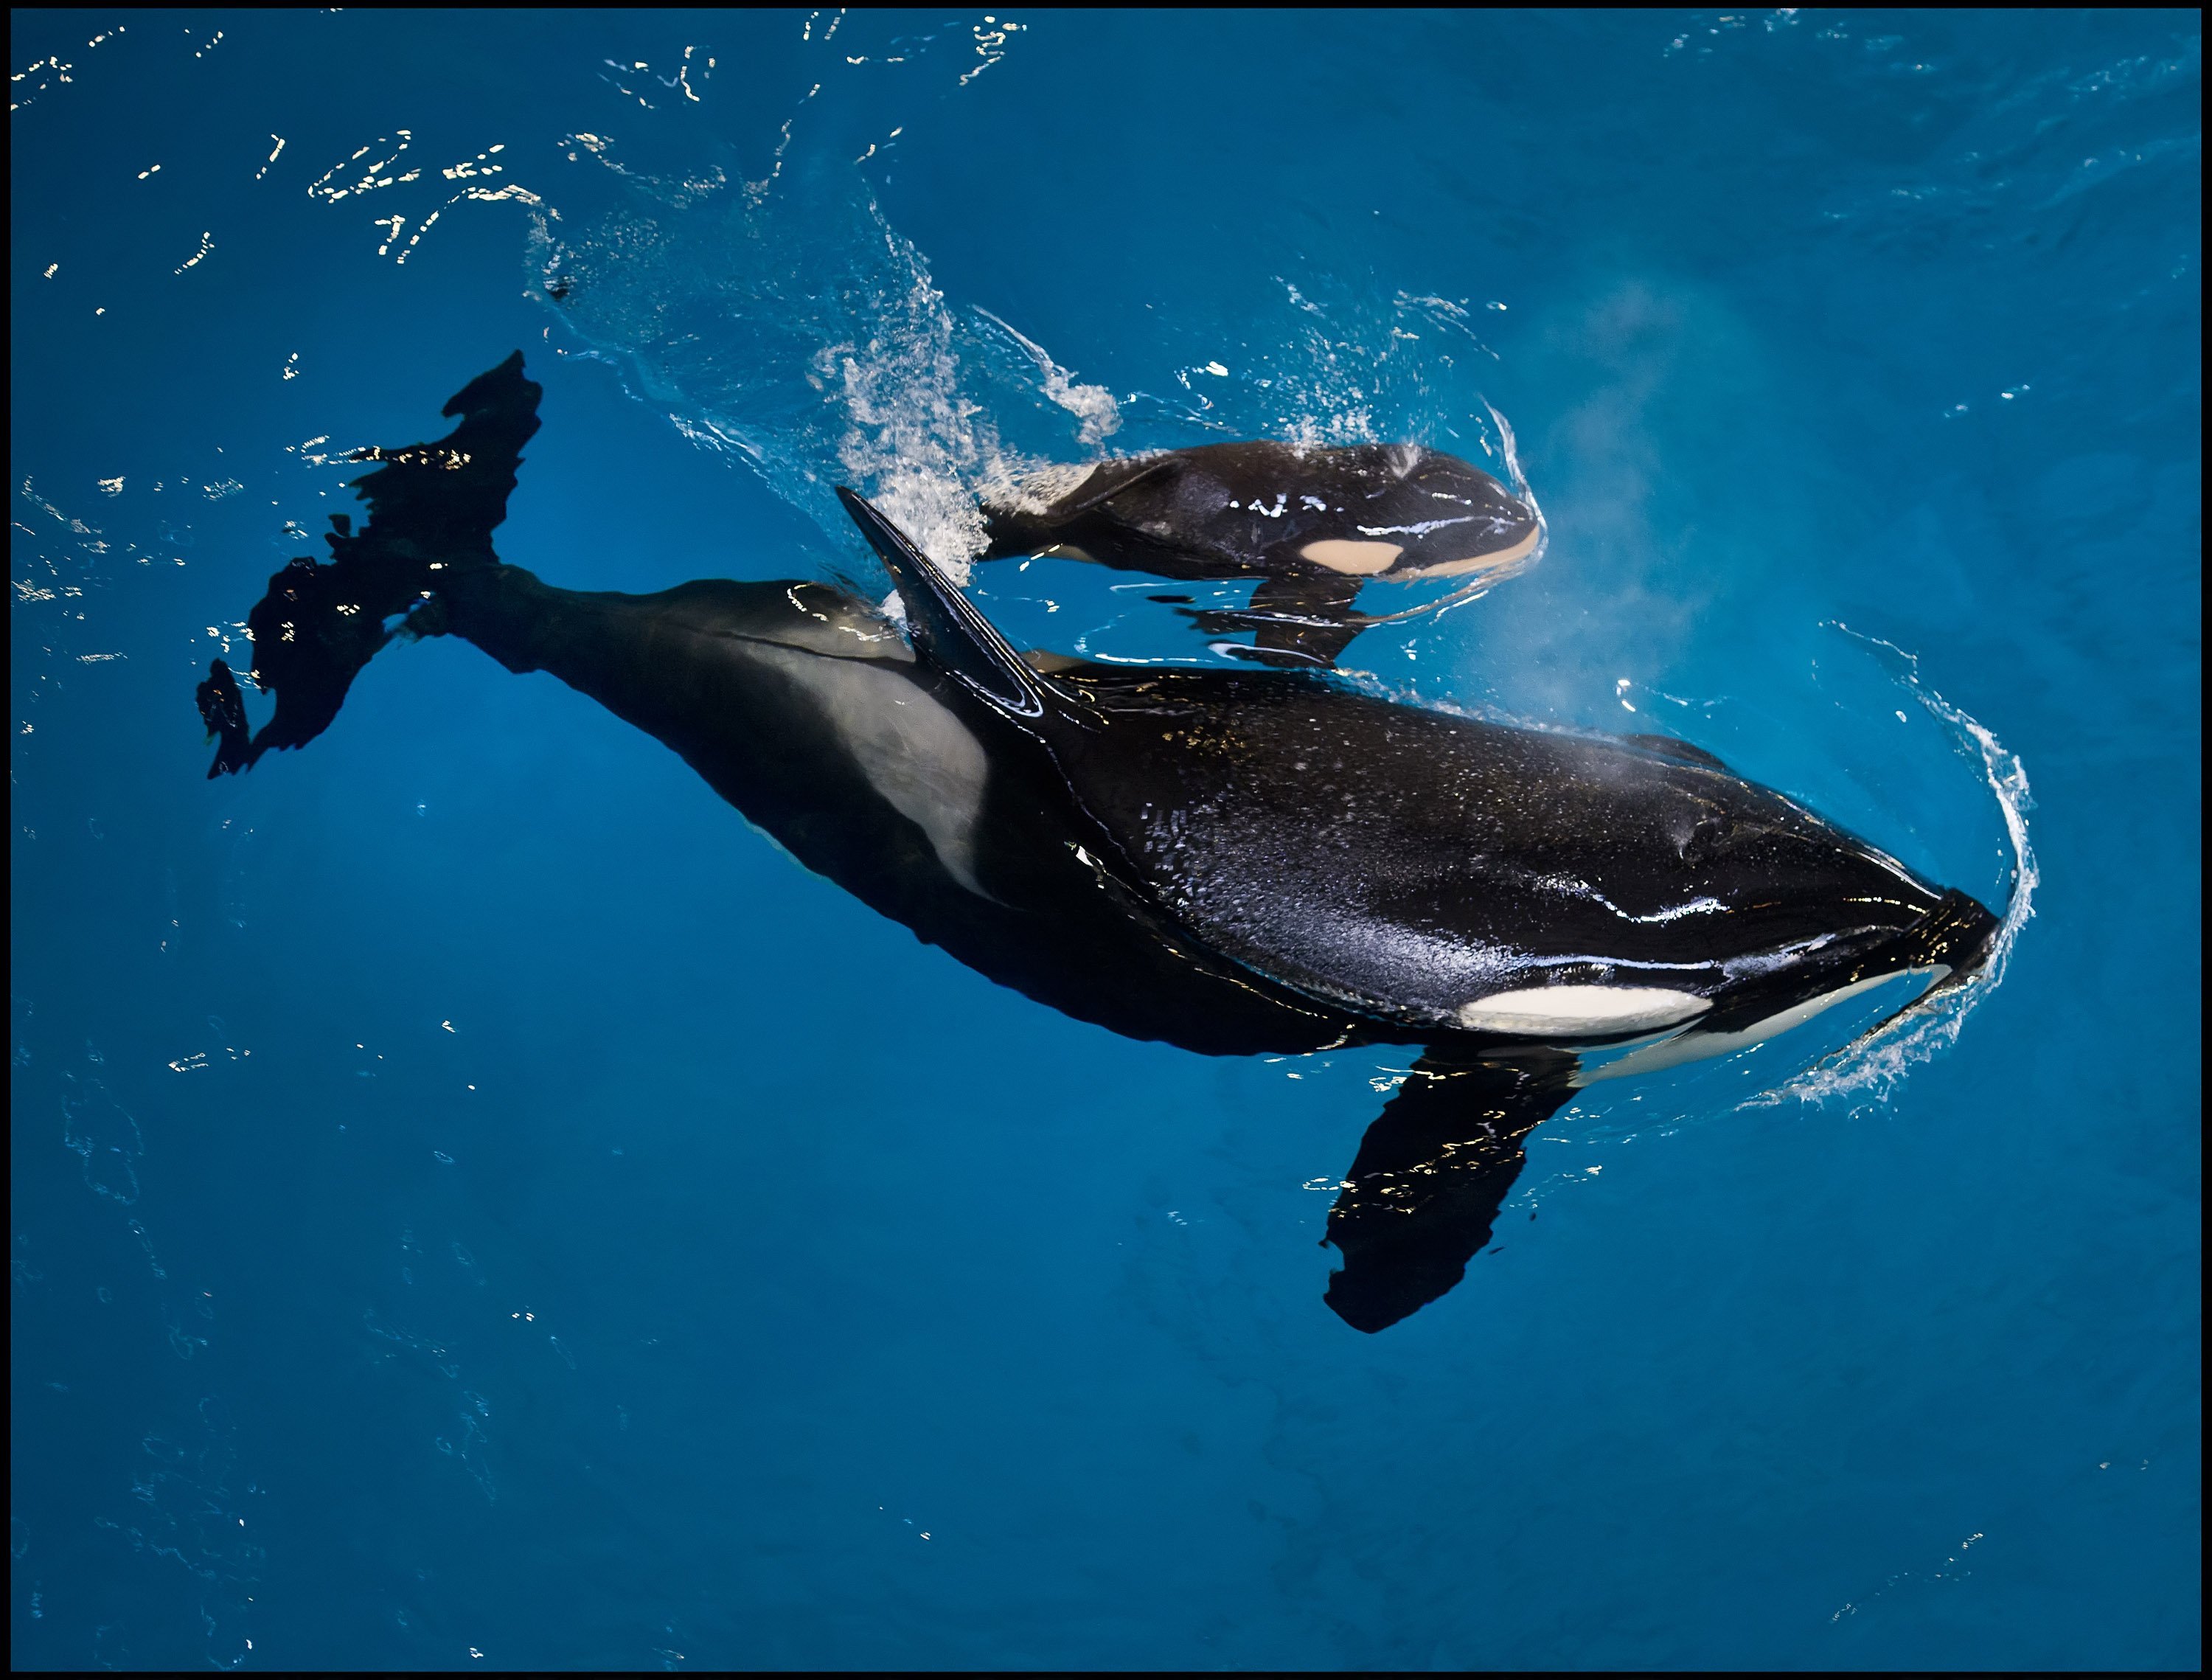 SeaWorld San Antonio welcomed an orca calf on Wednesday April 19, 2017 afternoon, the last to be born at a SeaWorld park.